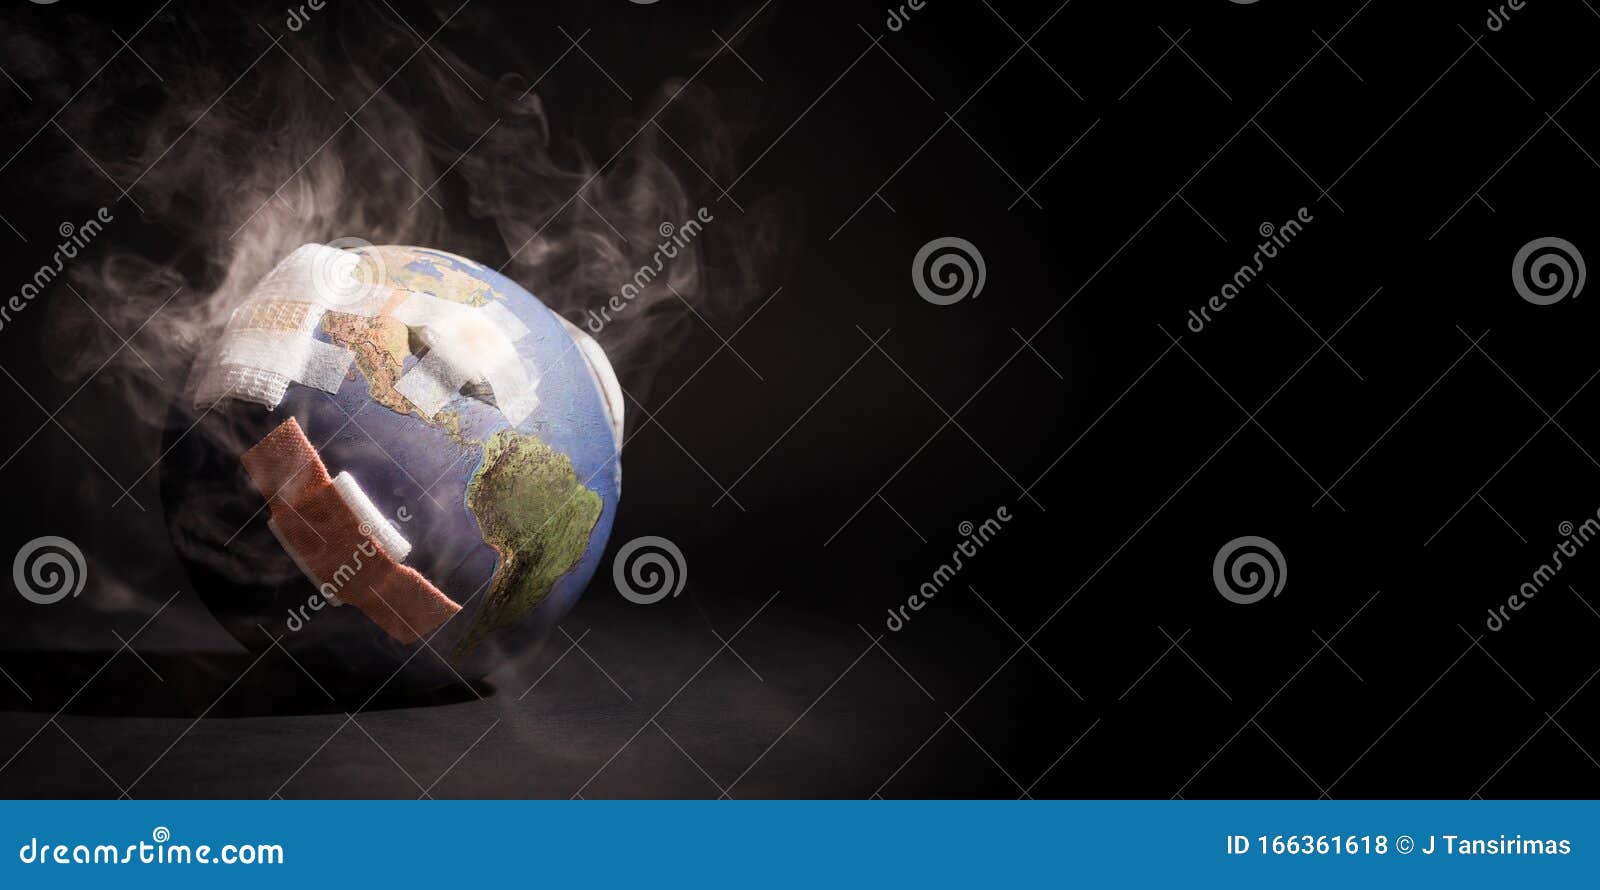 white smoke cover around the globe world full of bandages, demonstrating impact of global warming, climate change, pollution.